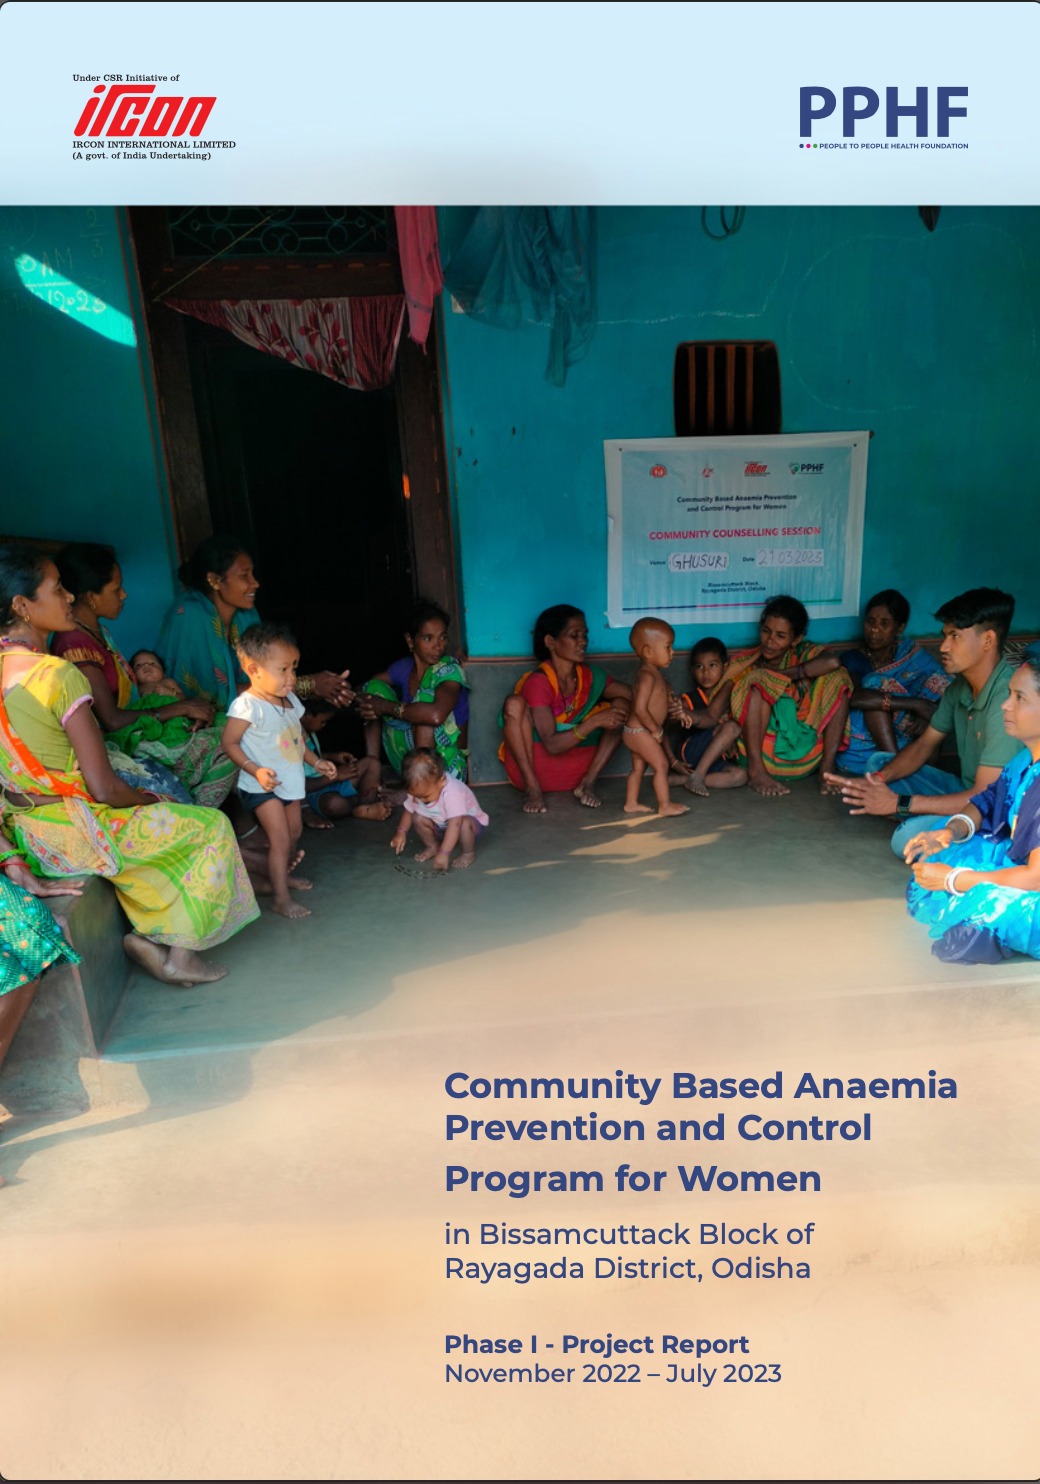 Community Based Anaemia Prevention and Control Program for Women